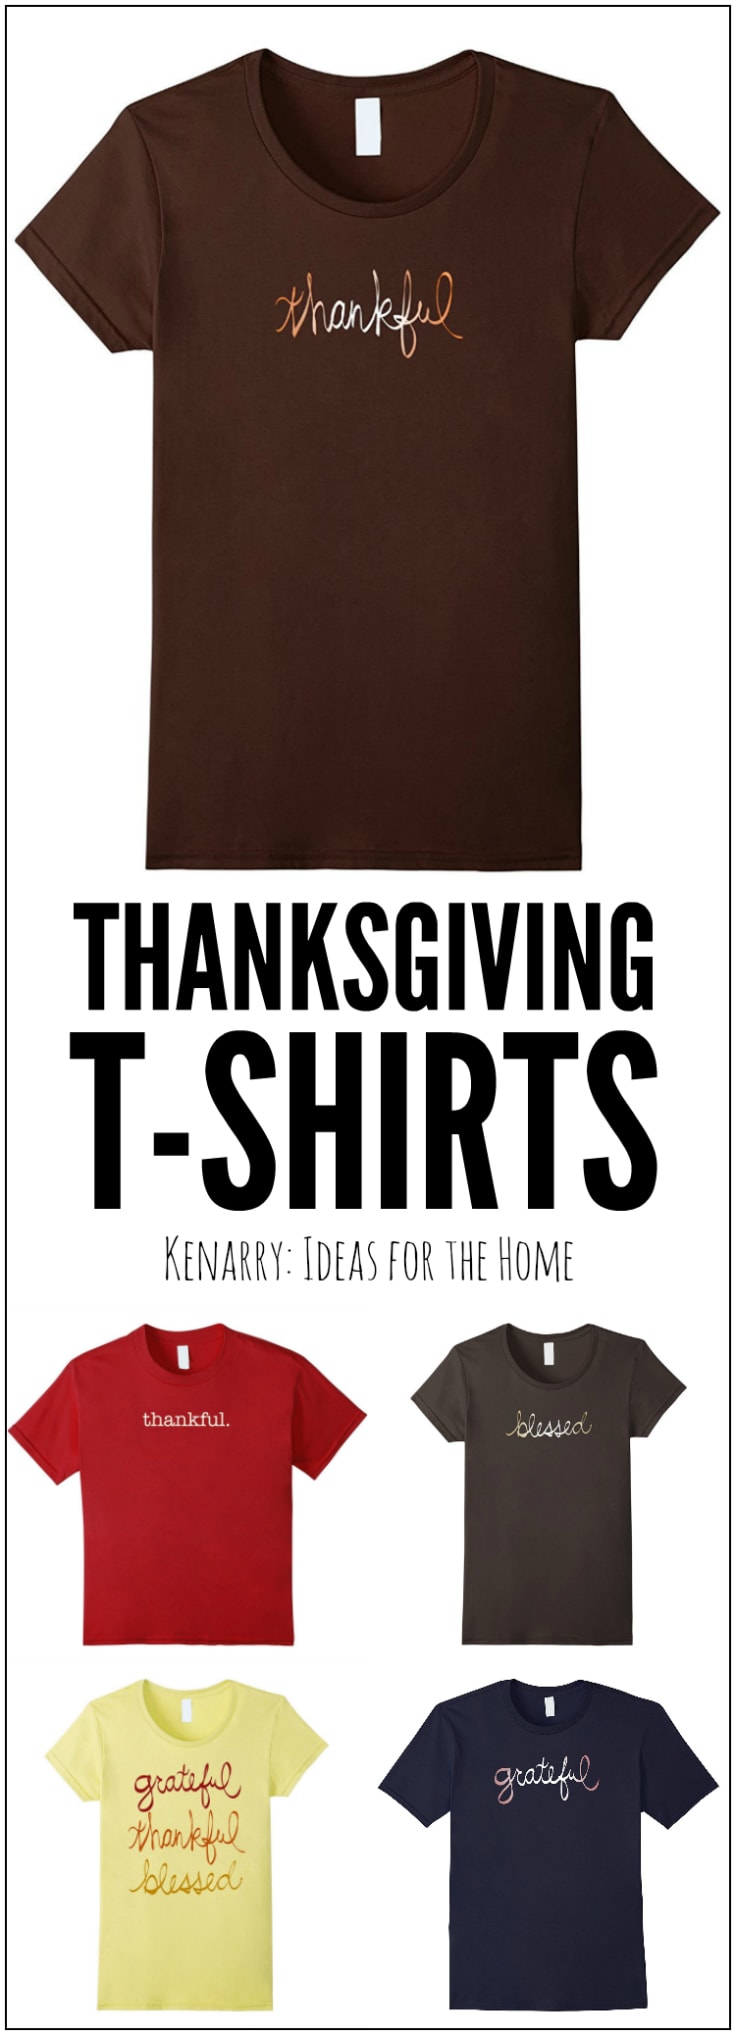 These Thanksgiving shirts are casual and stylish, perfect to wear this holiday season. The t-shirts, designed by Kenarry.com, comes in men's, women's and kid's sizes for the whole family.